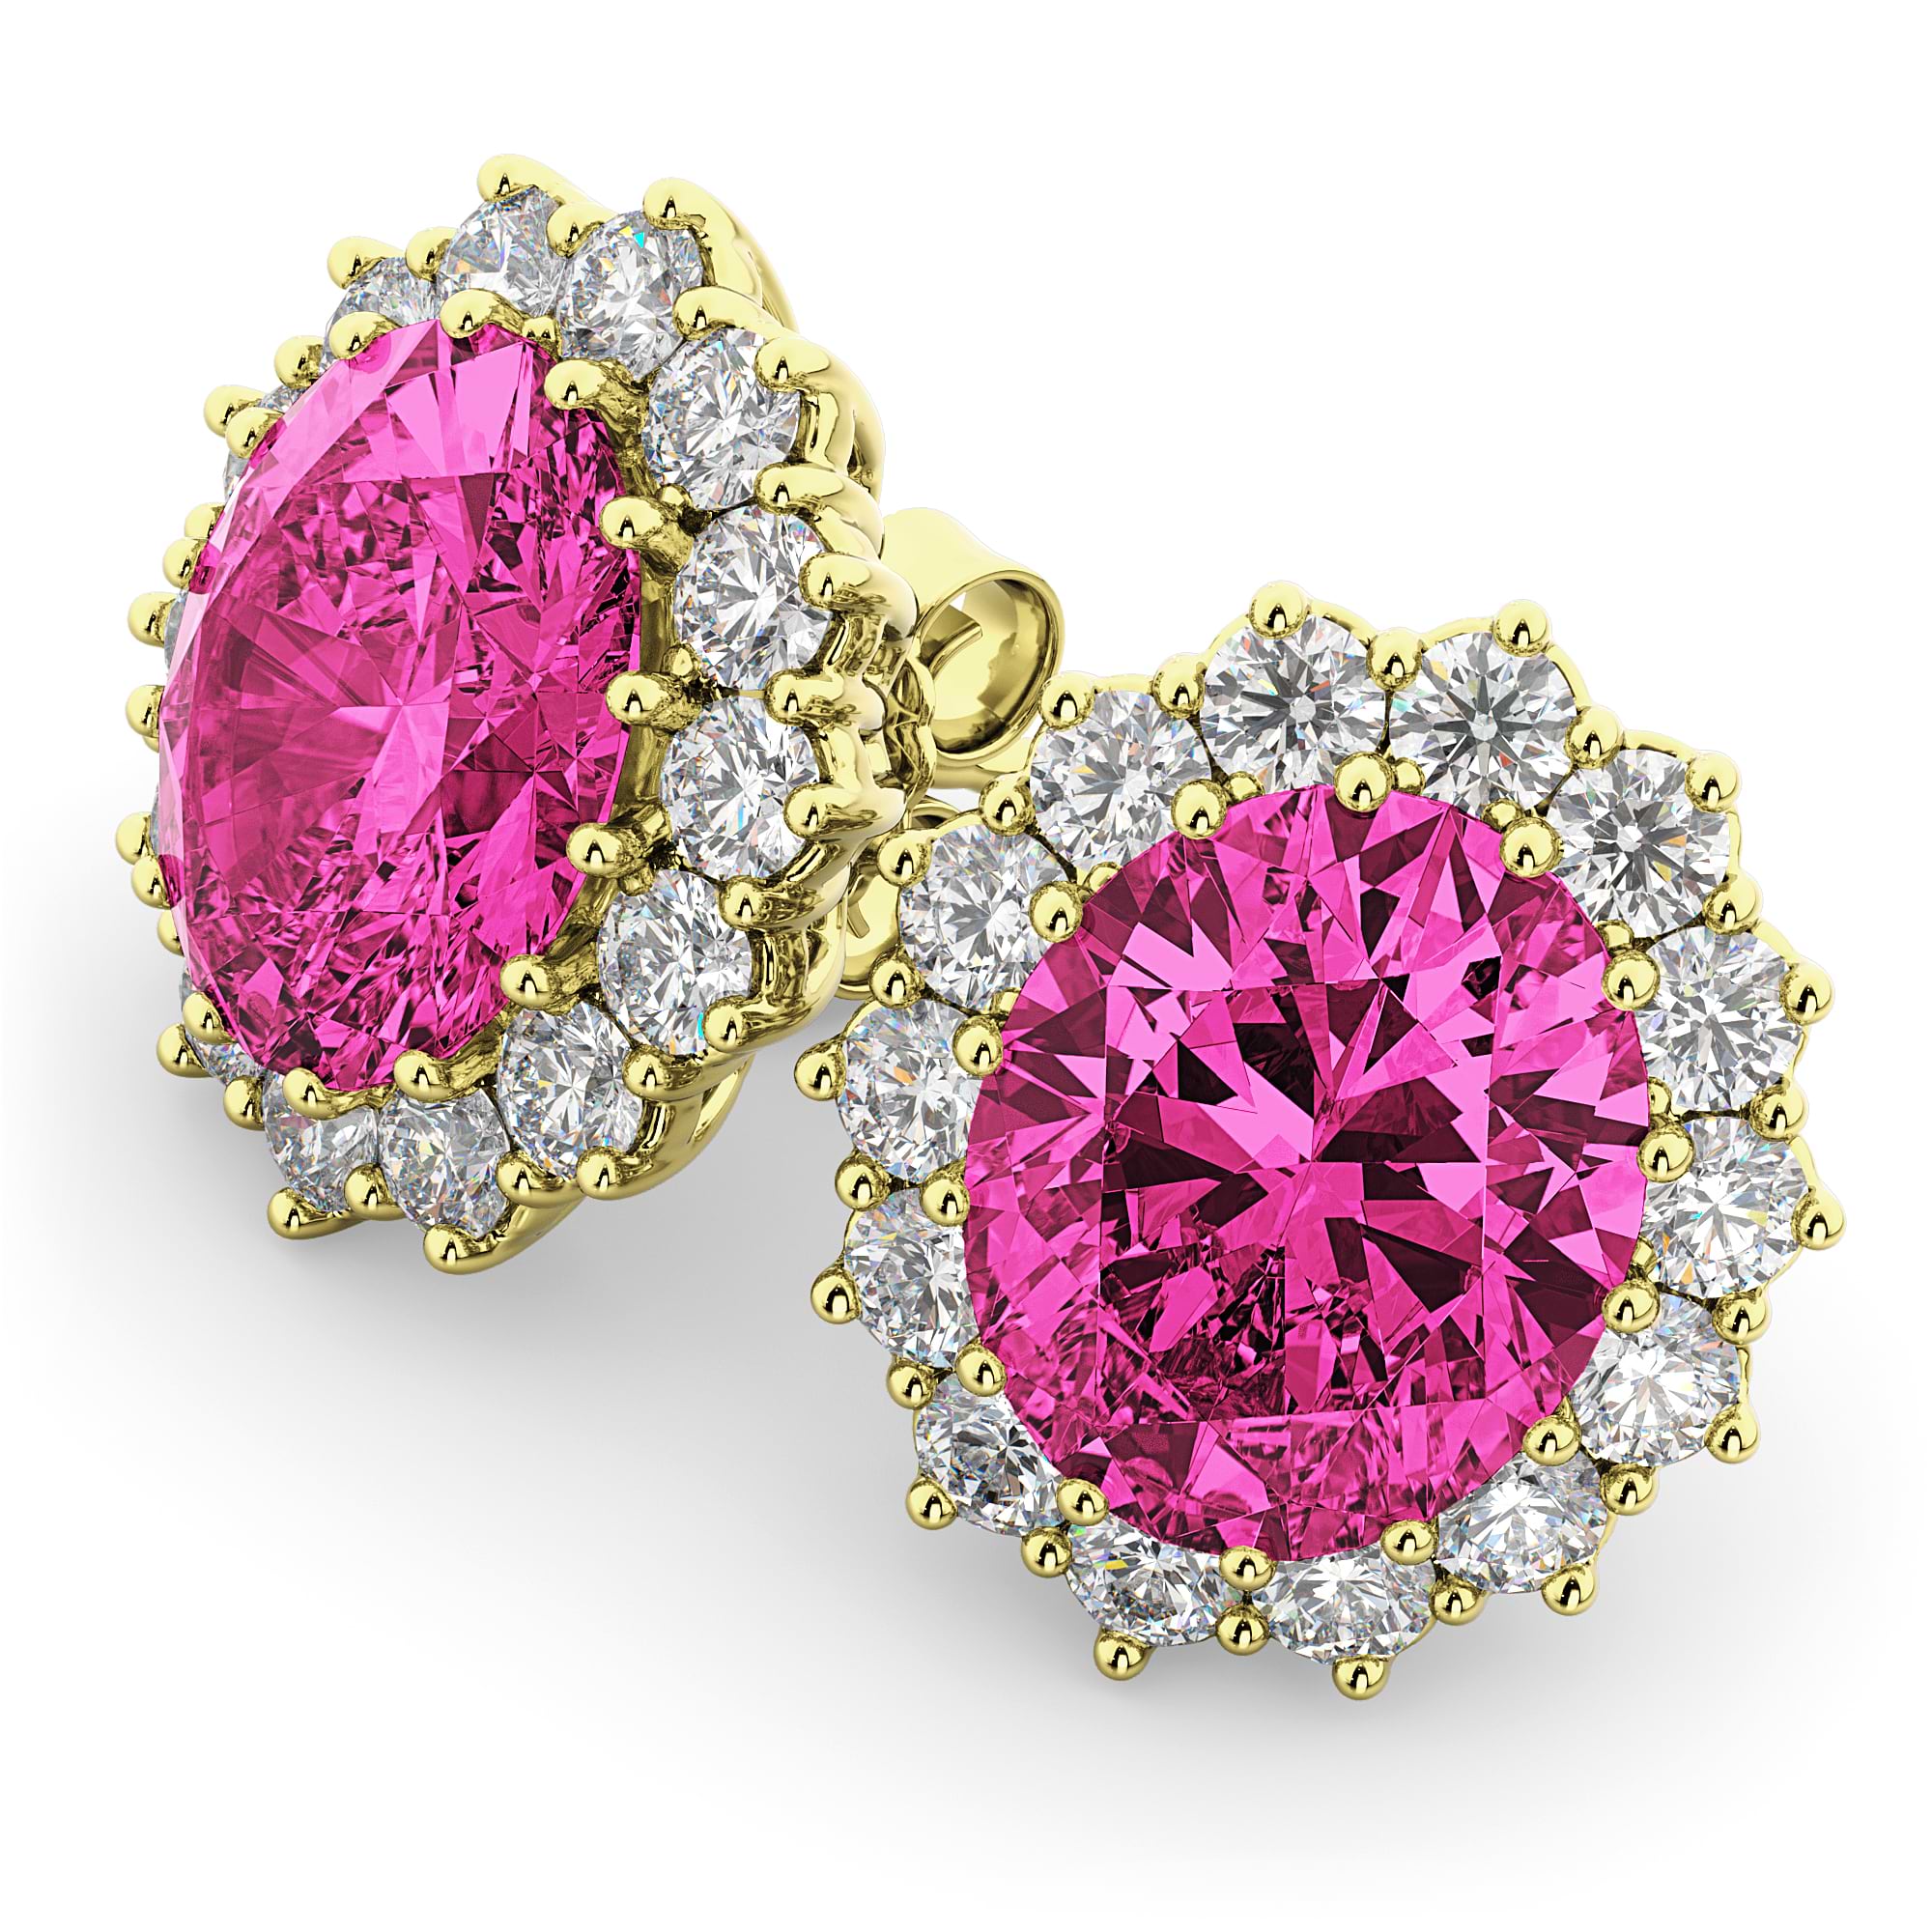 Oval Pink Tourmaline & Diamond Accented Earrings 14k Yellow Gold 10.80ctw